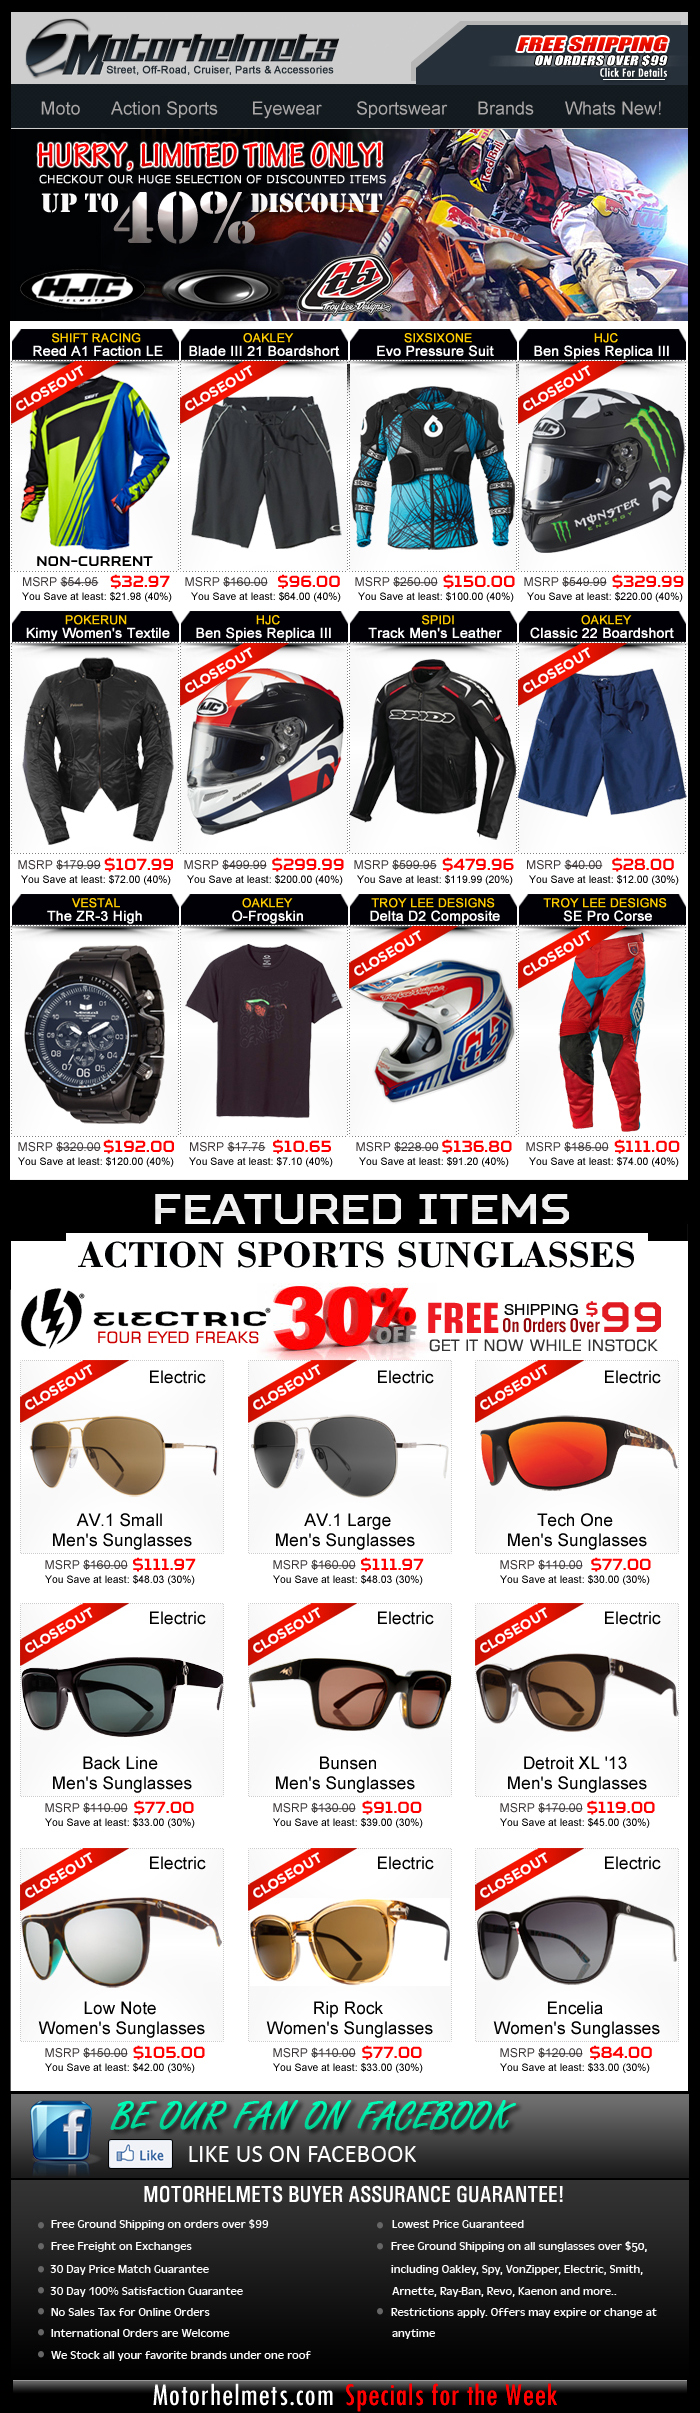 Up to 40% OFF on HJC, Oakley and TLD Gear and Apparel!